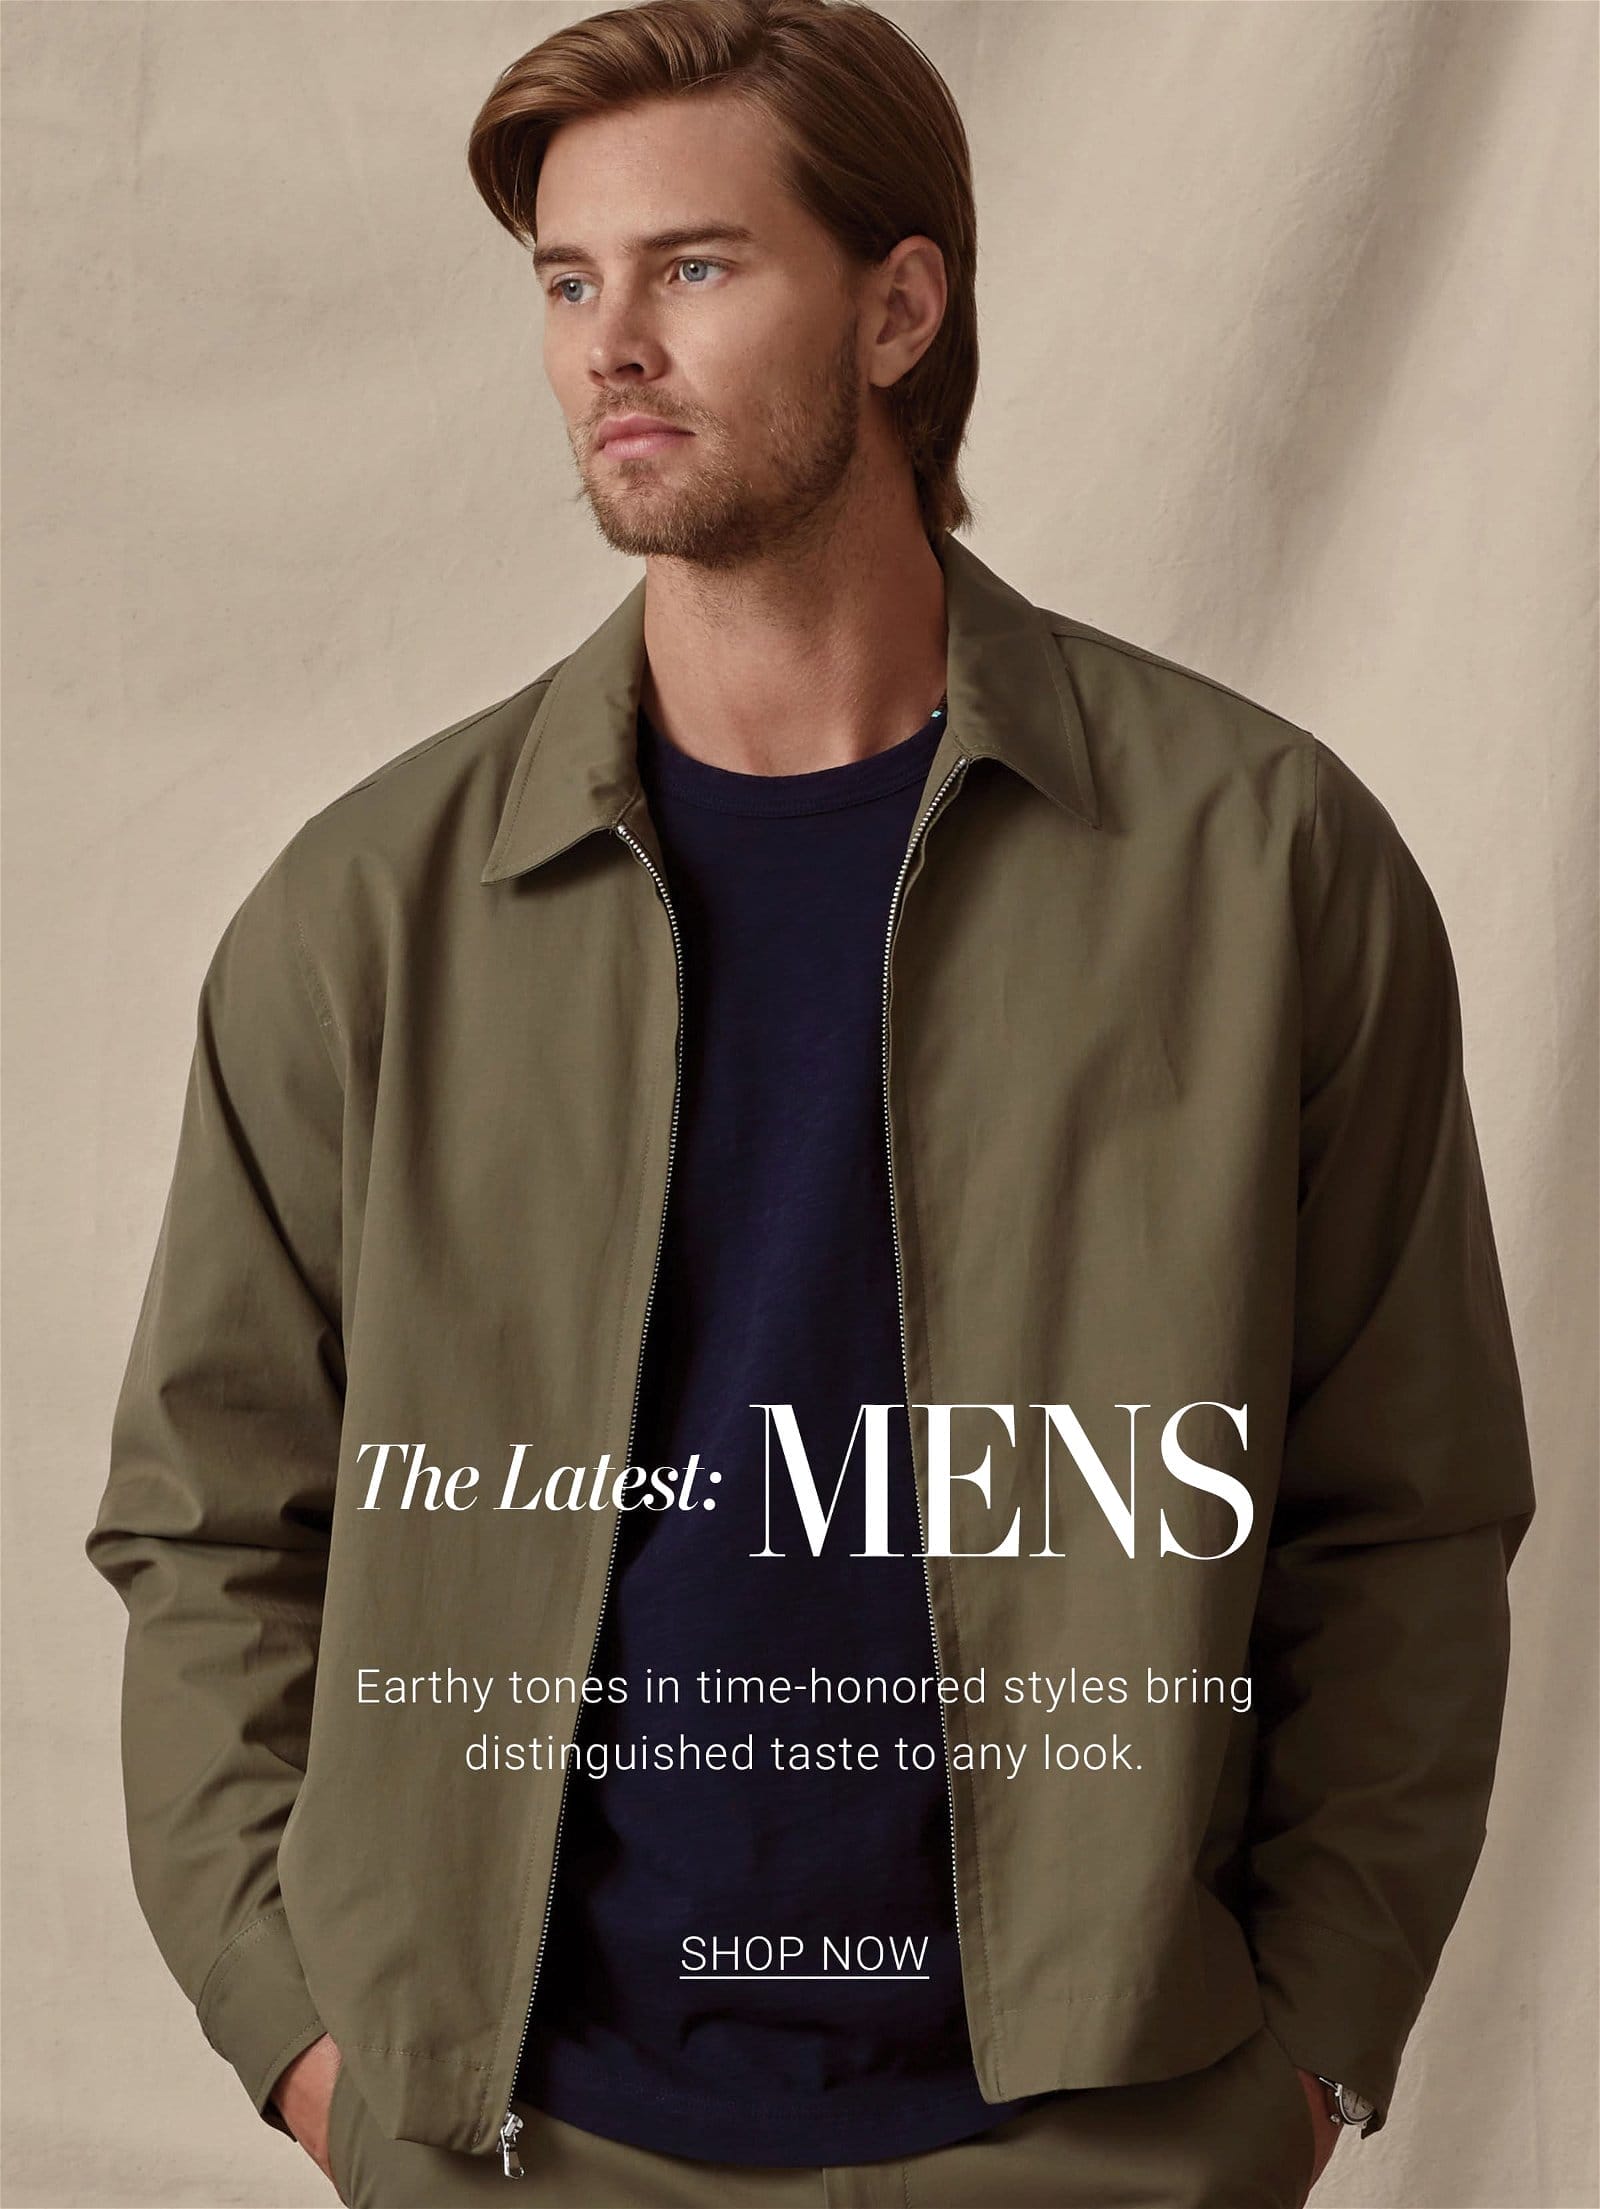 The Latest: Mens. Earthy tones in time-honored styles bring distinguished taste to any look.